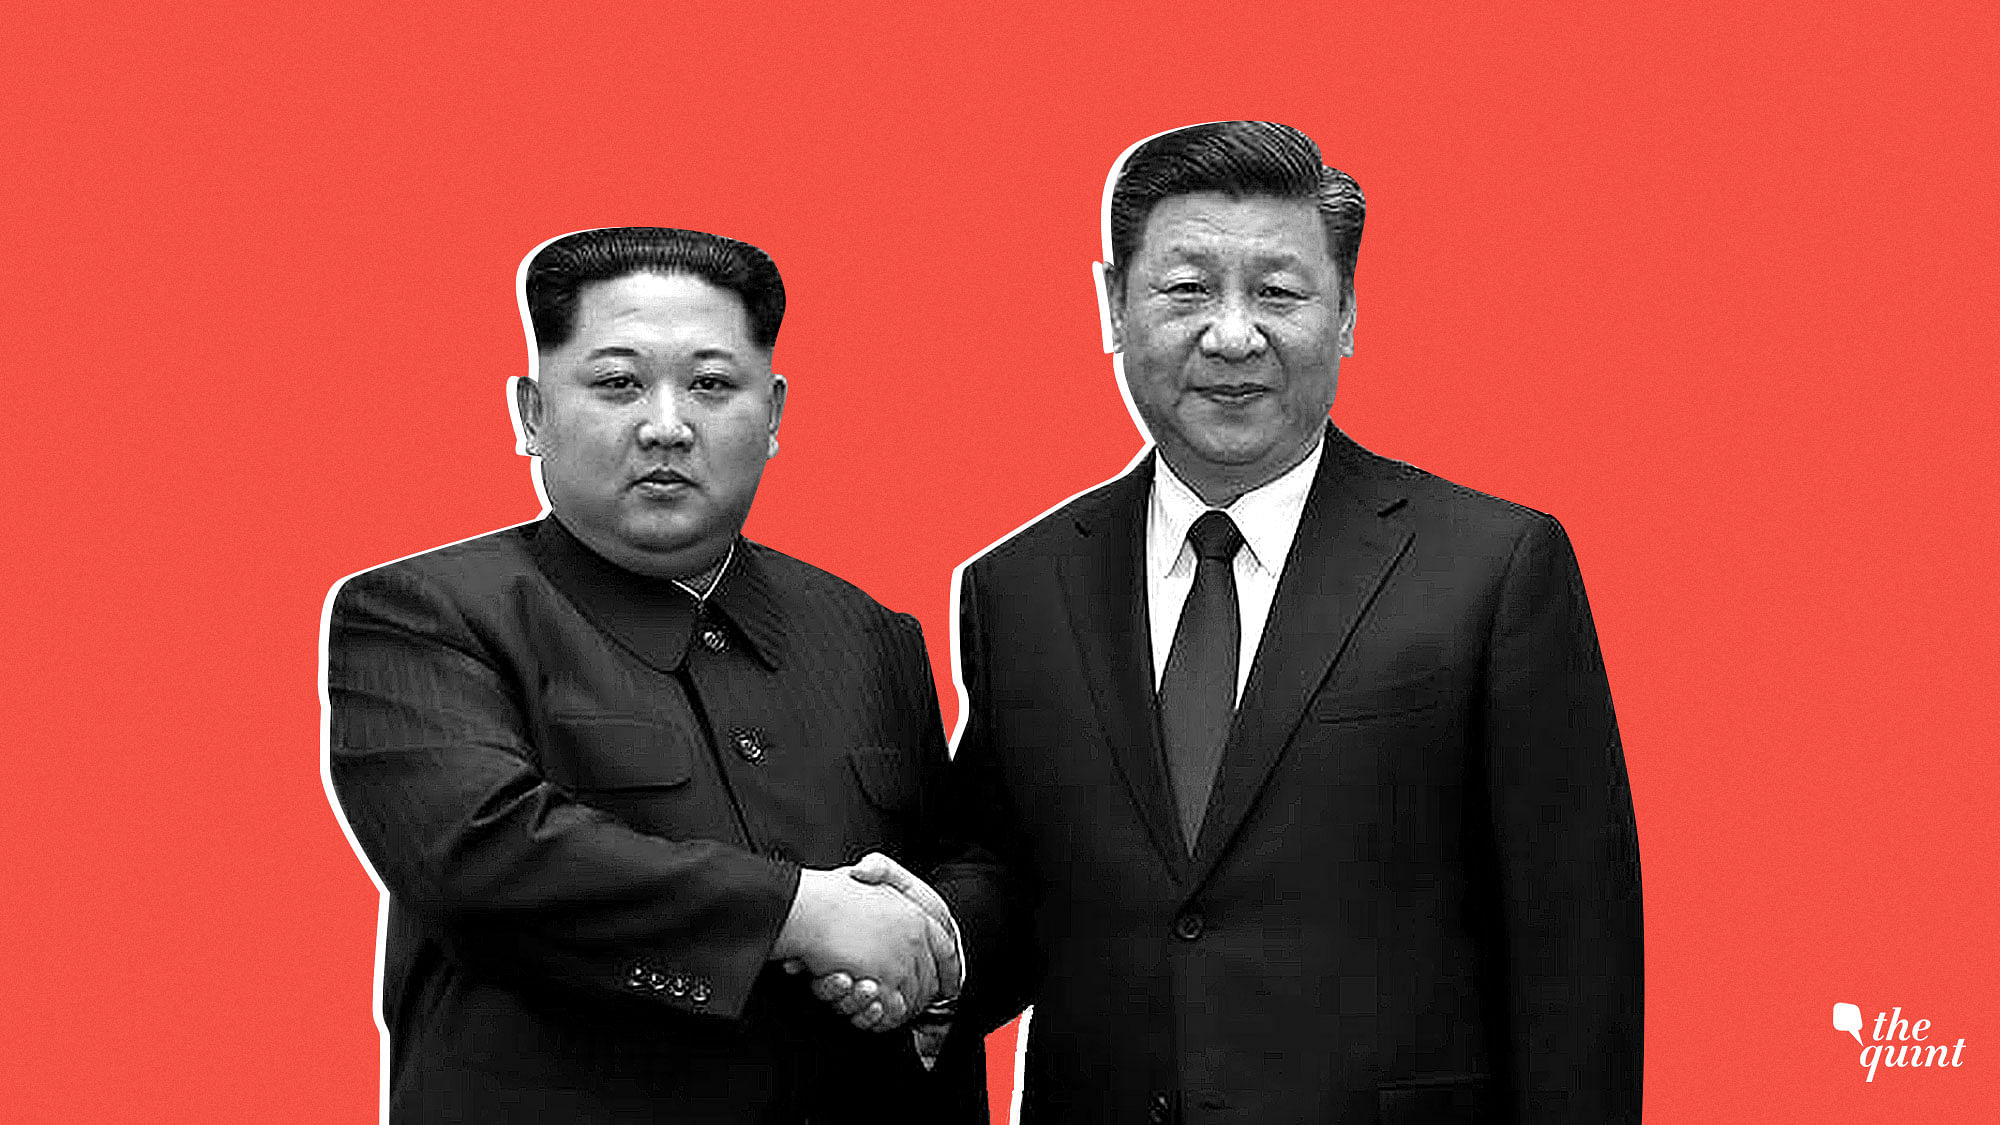 In the process of acquiring nuclear power, KJU jolted the strategic community, grabbed the attention of Washington and embarrassed China, its sole ally and economic lifeline.